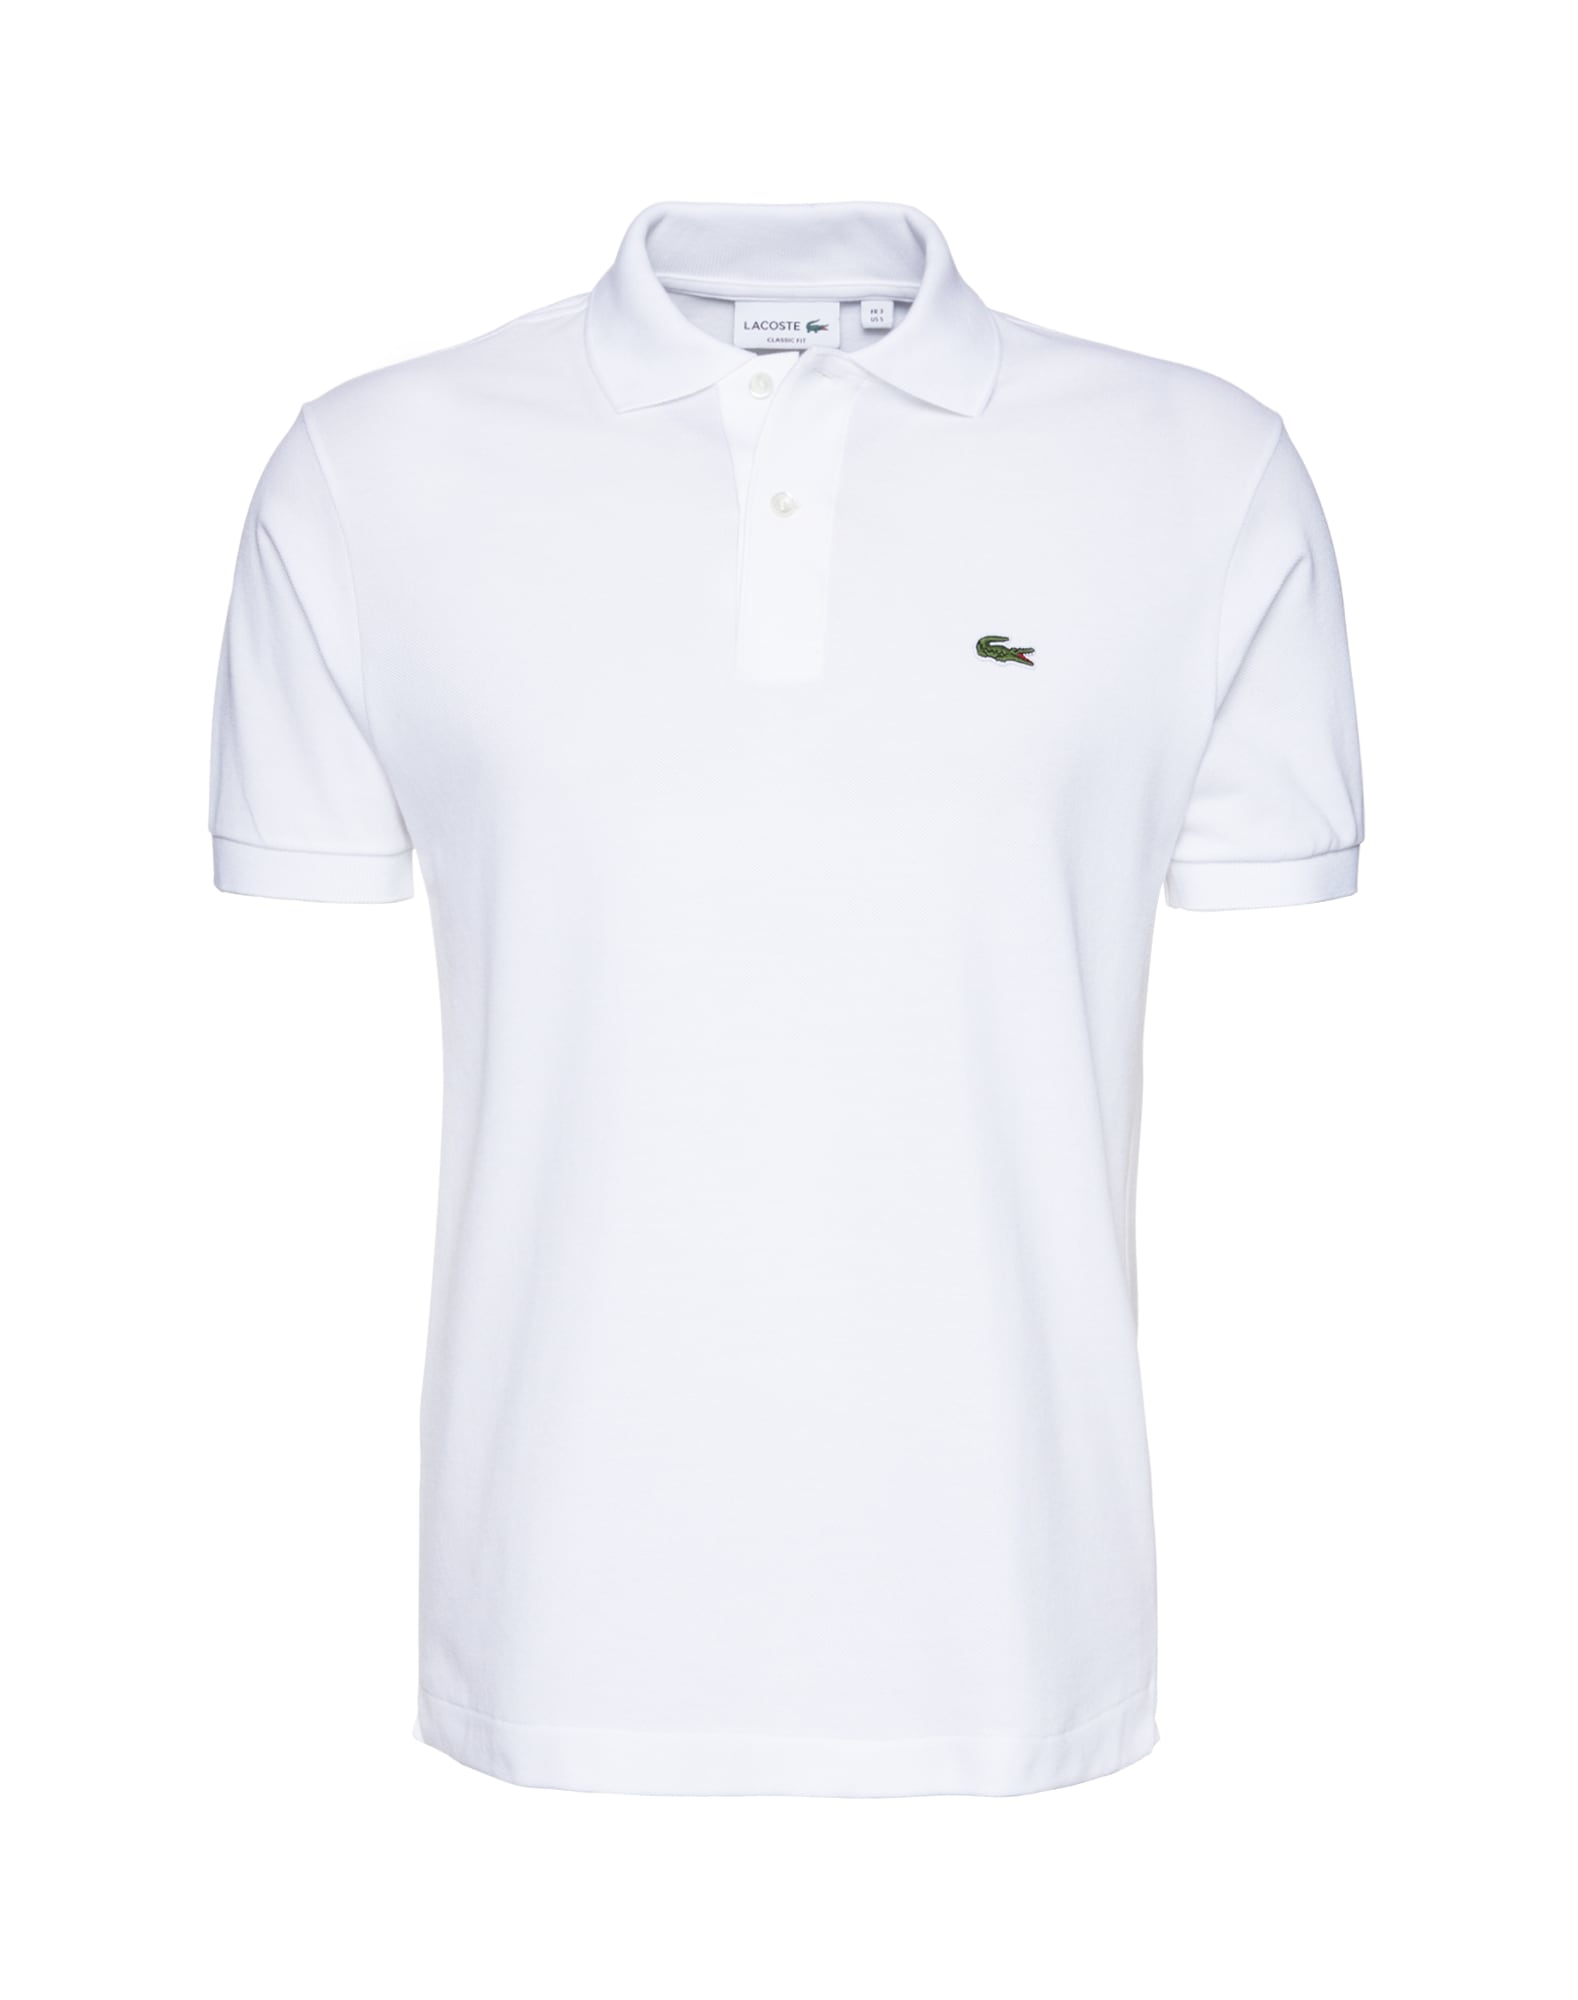 Lacoste LACOSTE Poloshirt offwhite